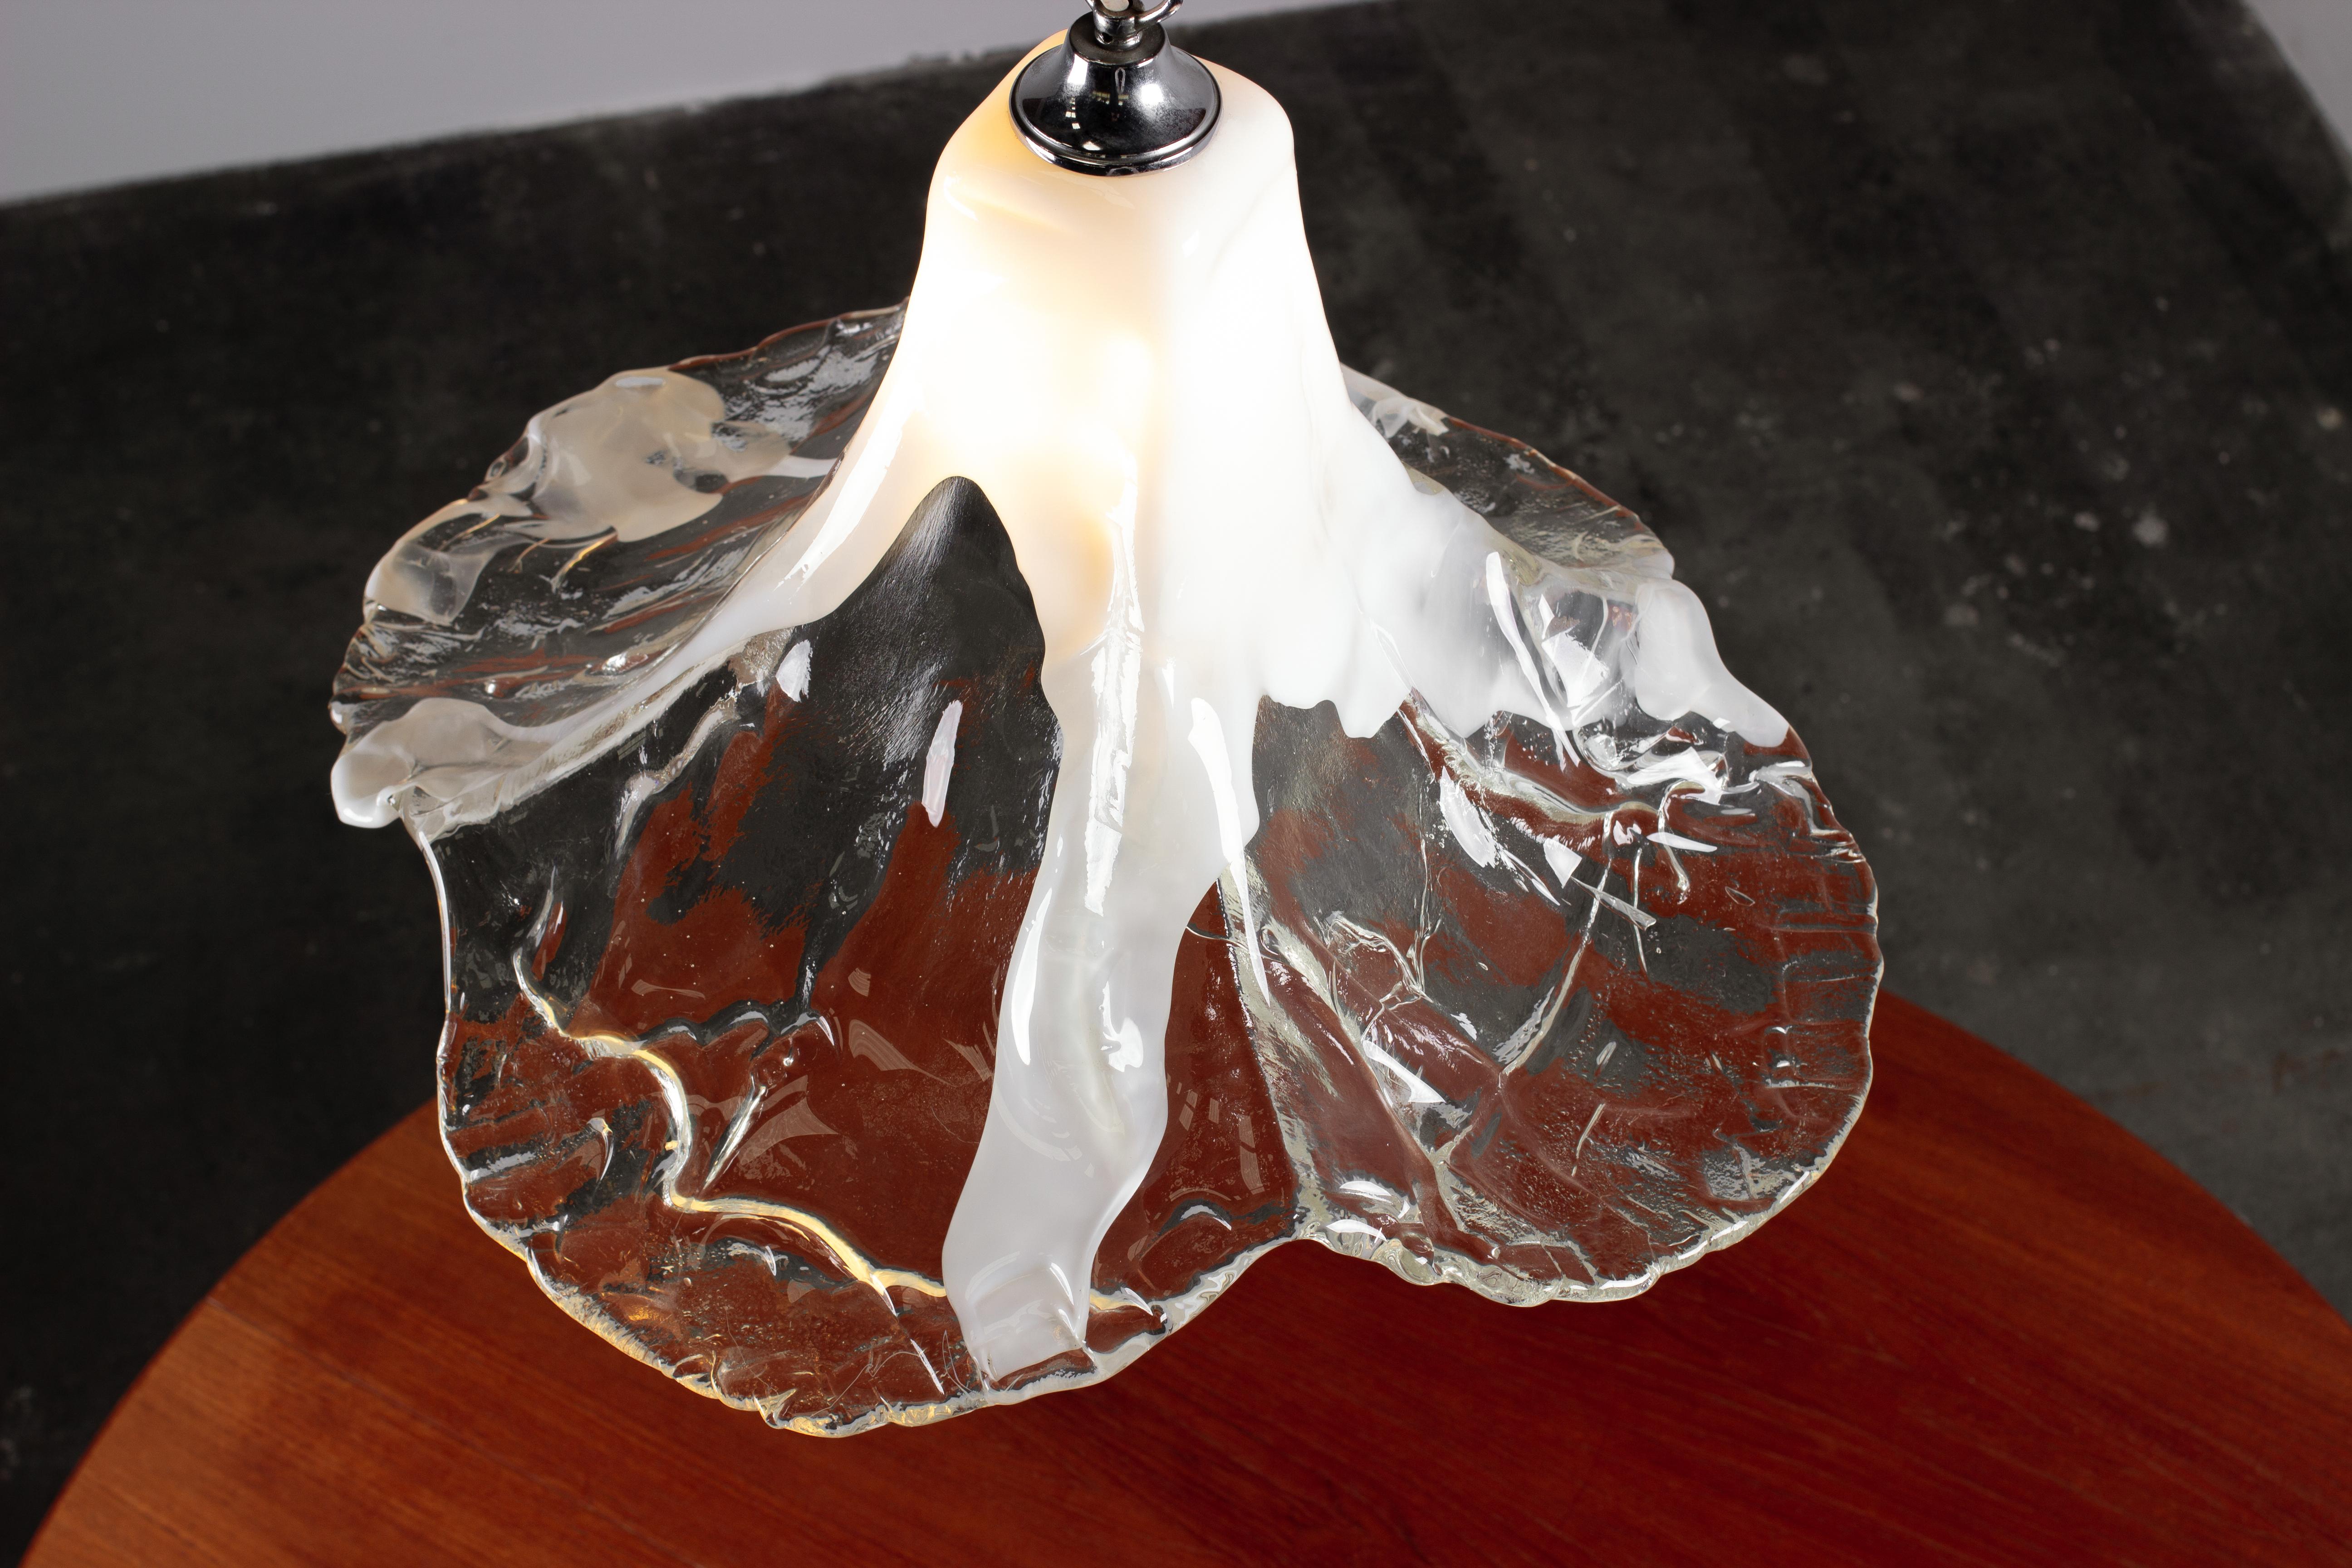 Design by Carlo Nason for Kalmar Franken lighting Austria, handmade by renowned Murano glassworks, Mazzega in Italy.

Mid-Century Modern floral pendant light. Single piece of very thick Murano glass shaped into a bellflower with slender neck at